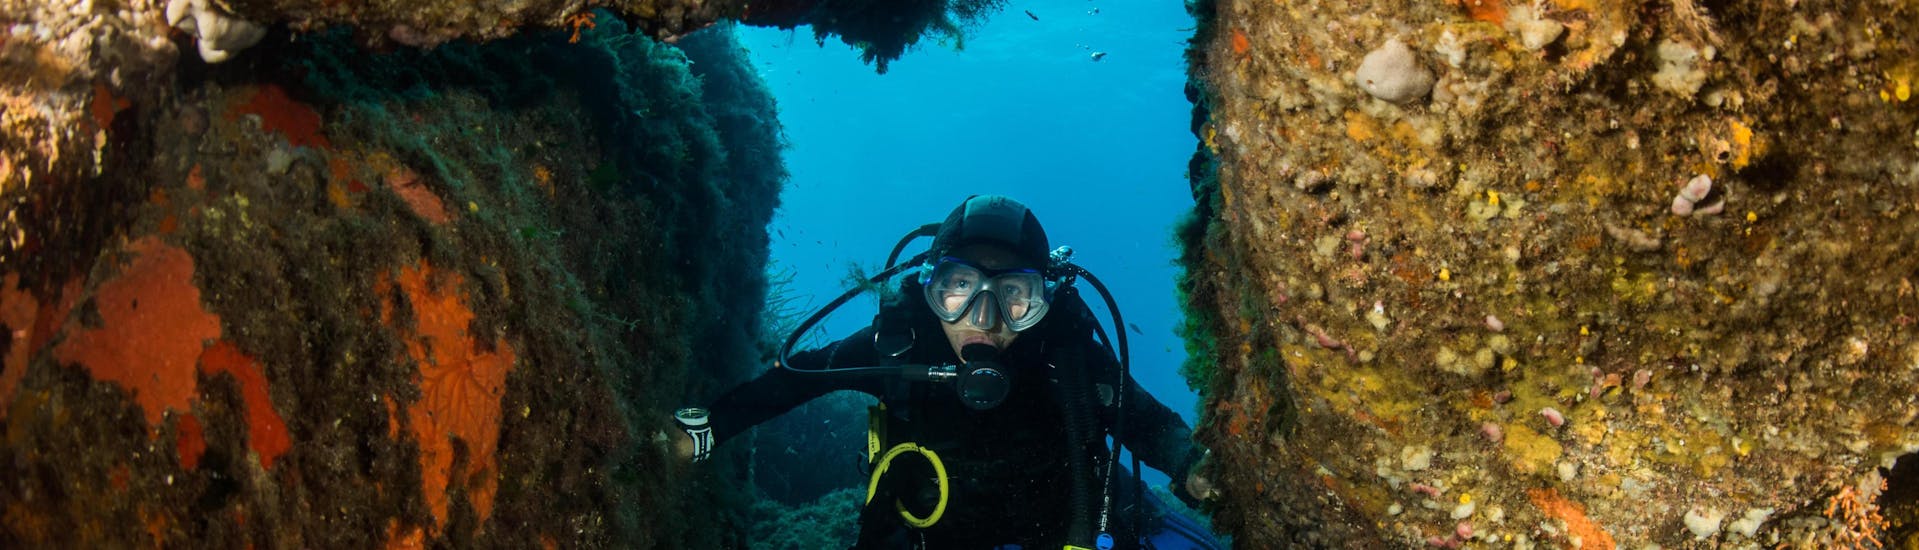 A diver is enjoying the seabed in Haute-Corse, Corsica during a diving excursion.